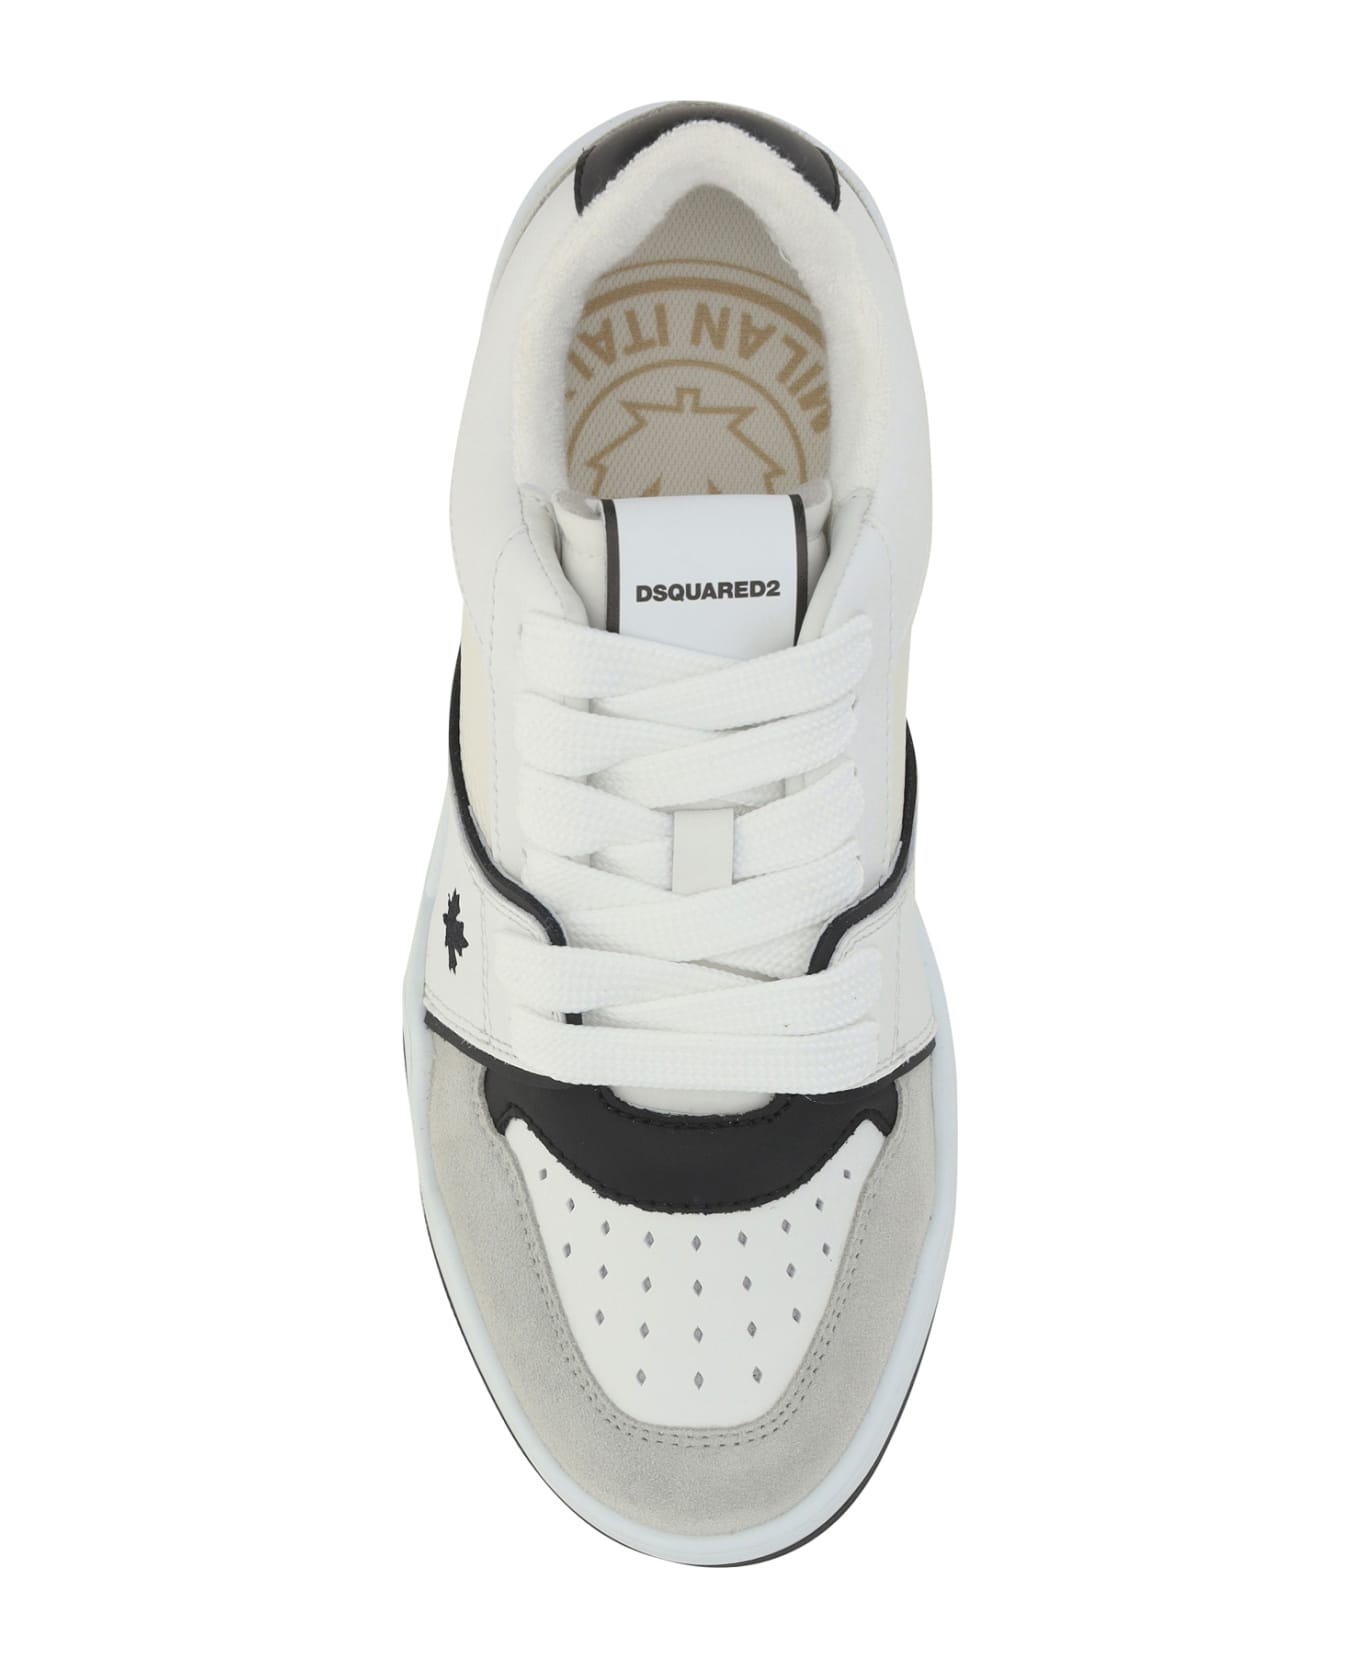 Dsquared2 'spiker' Sneakers - M072 スニーカー